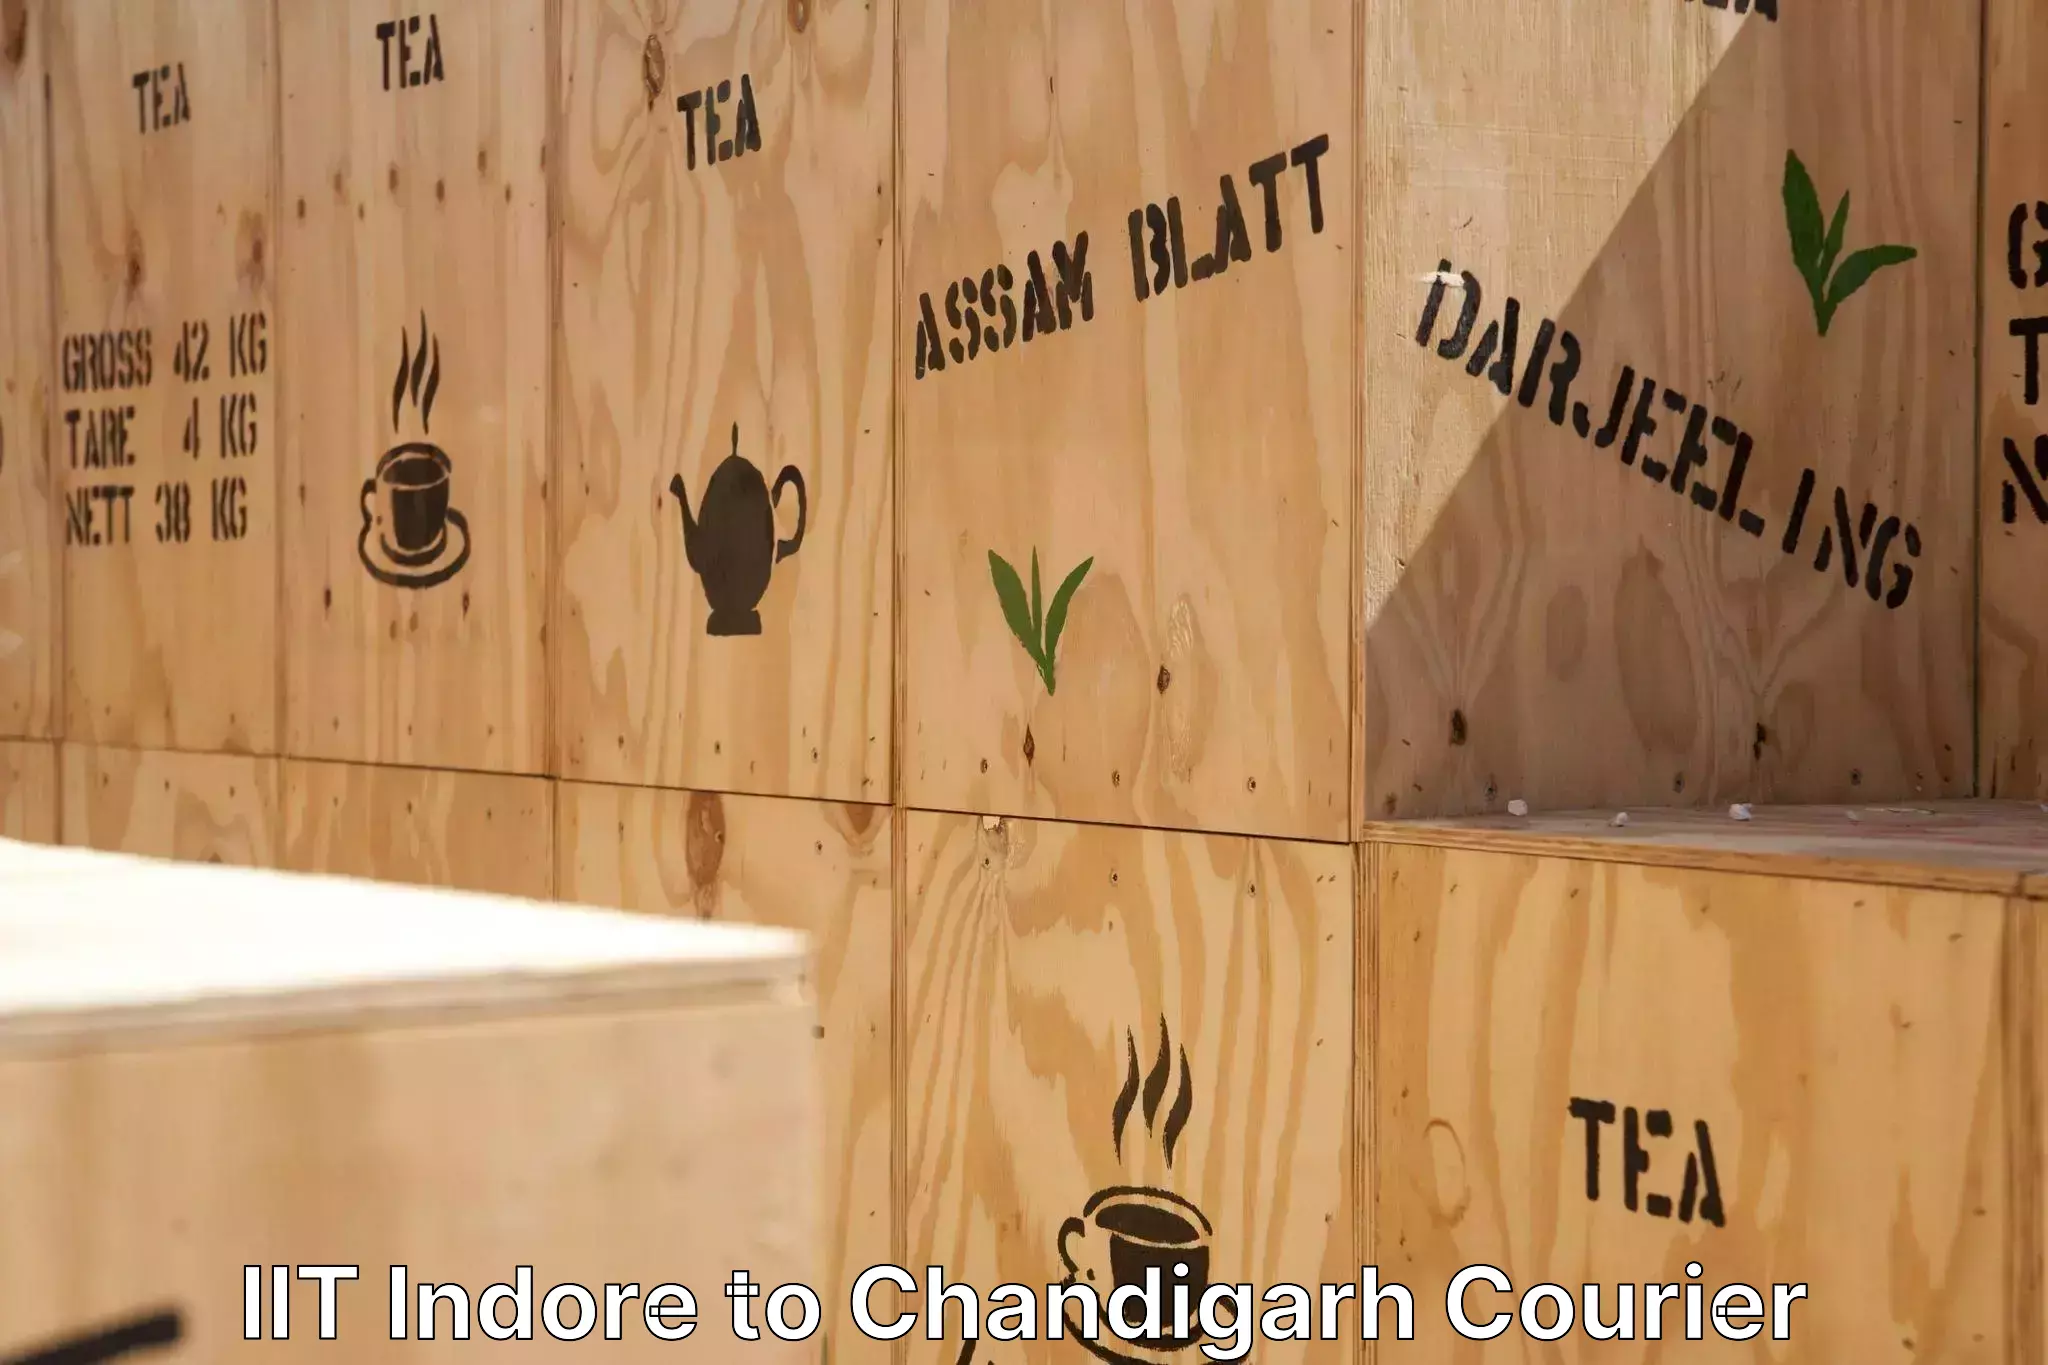 Quality relocation assistance in IIT Indore to Chandigarh